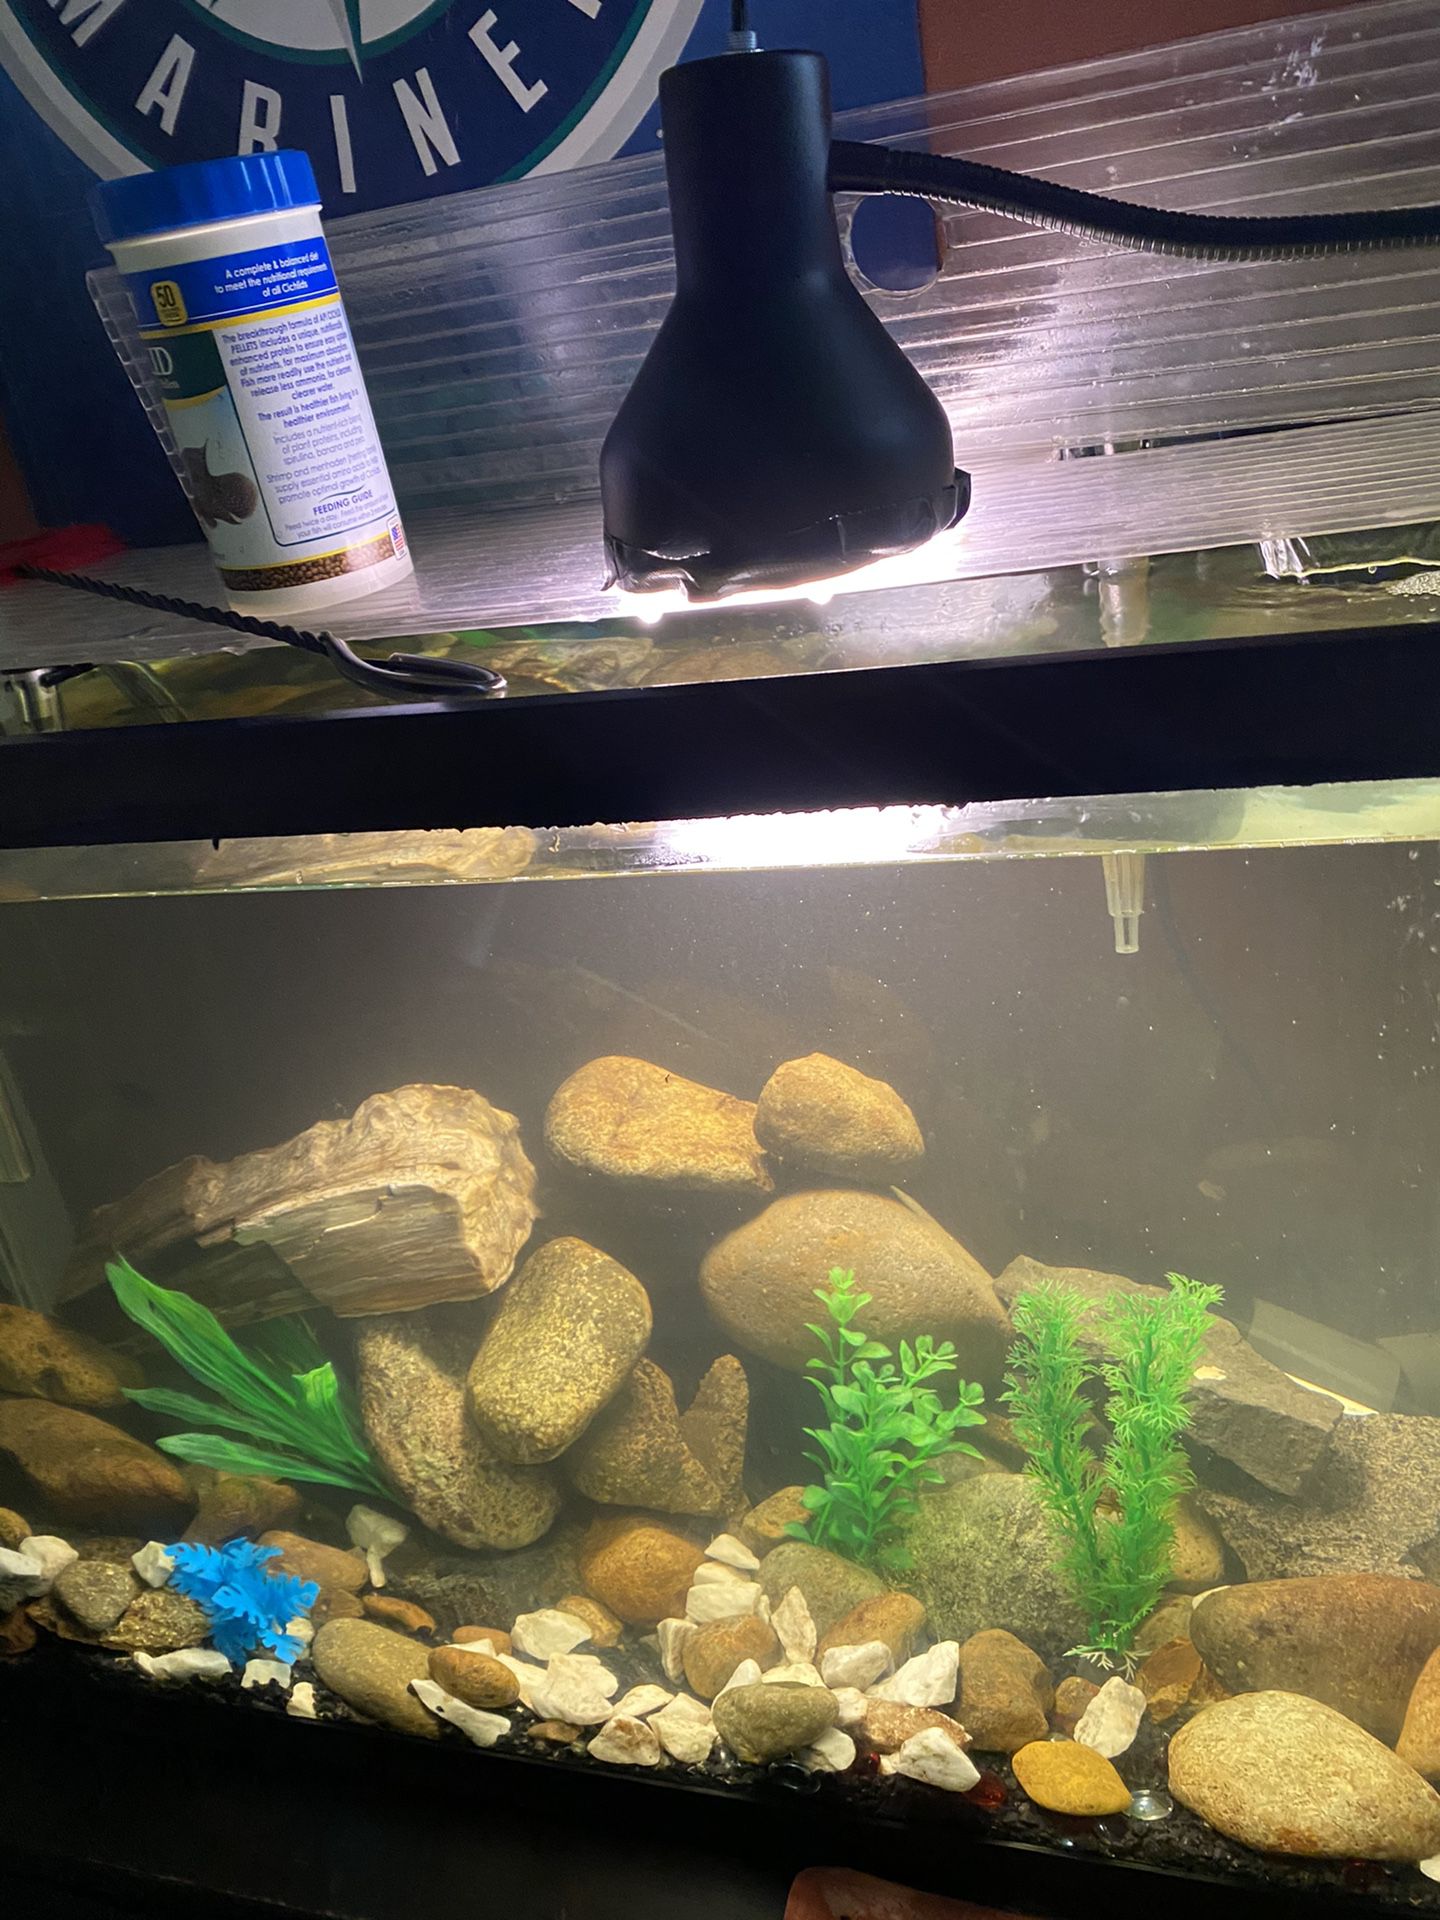 30gallin aqauirium with 4 fish 2 convict cichlids that have fry and a plecostemus. Comes with flu all 50 gallon filter and heater all worth 200 selli